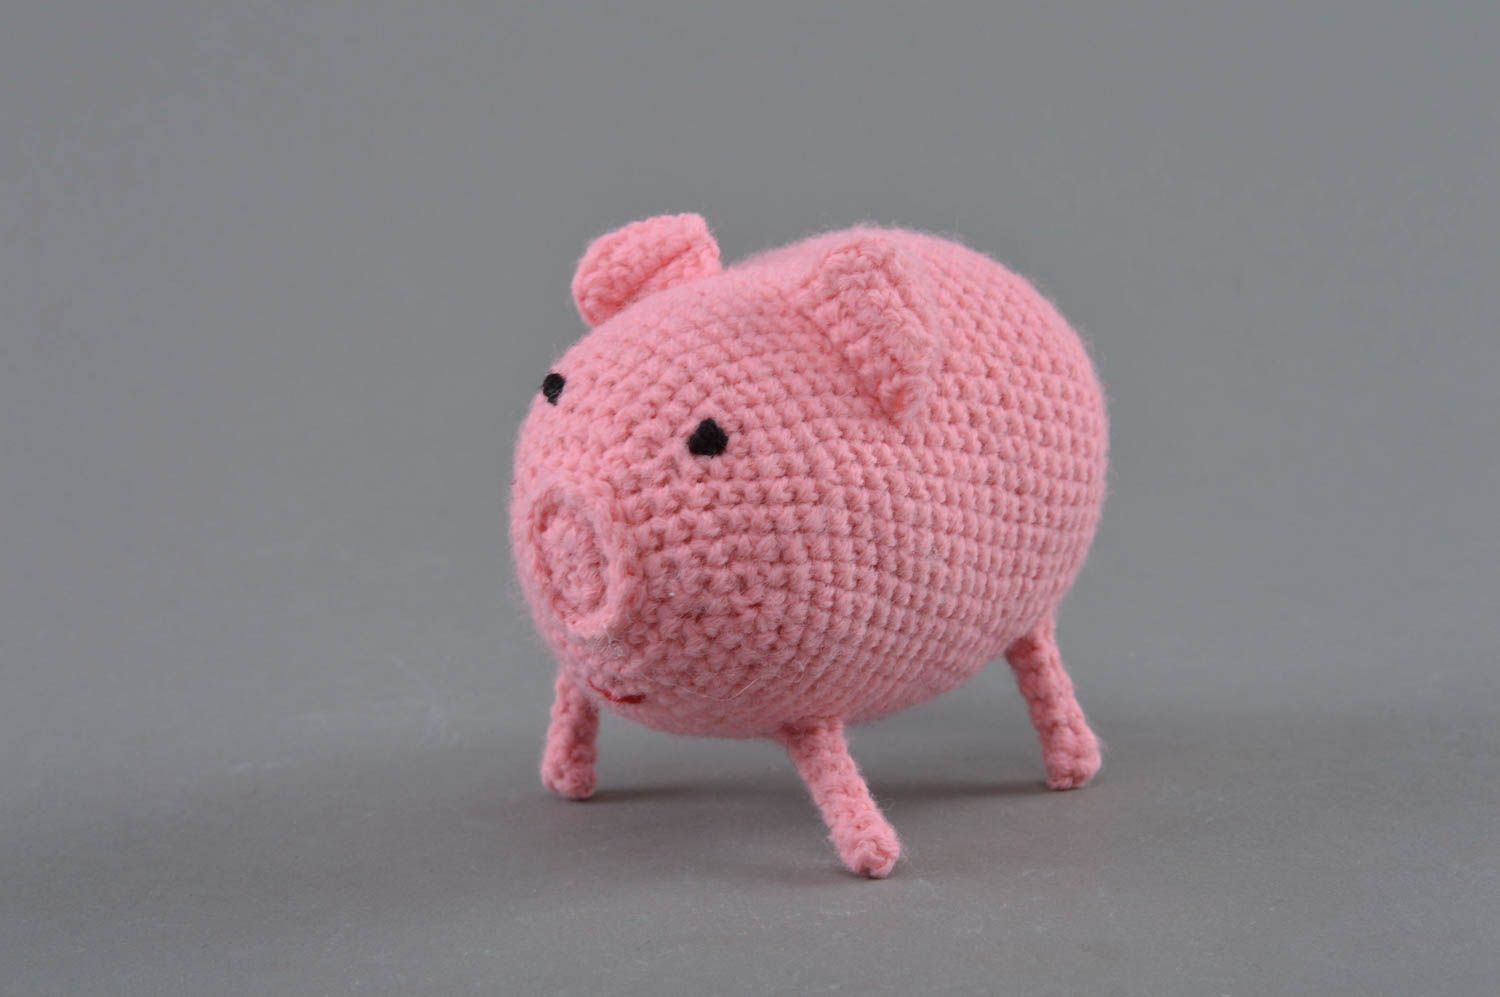 Beautiful pink handmade crochet soft toy pig for children and decor photo 1